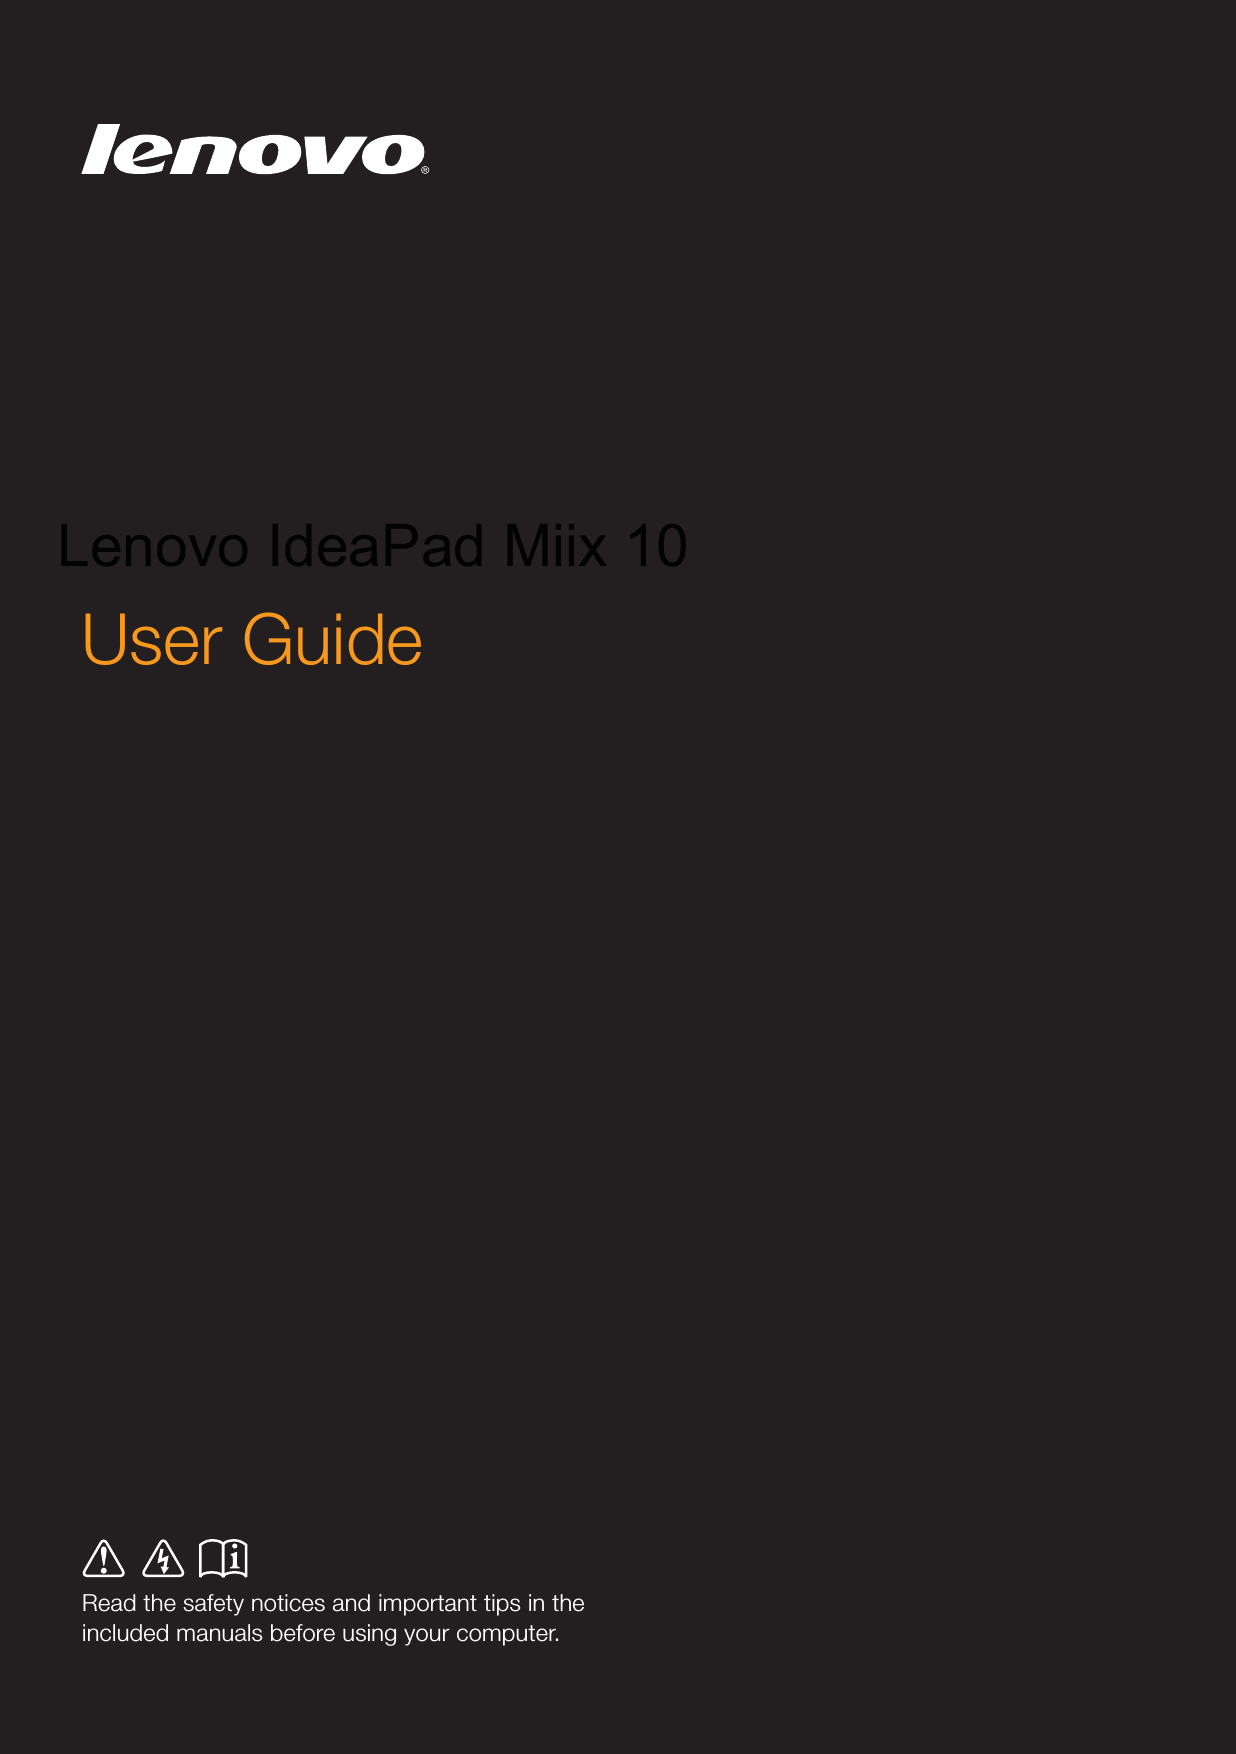 Read the safety notices and important tips in the included manuals before using your computer.User Guide Lenovo IdeaPad Miix 10